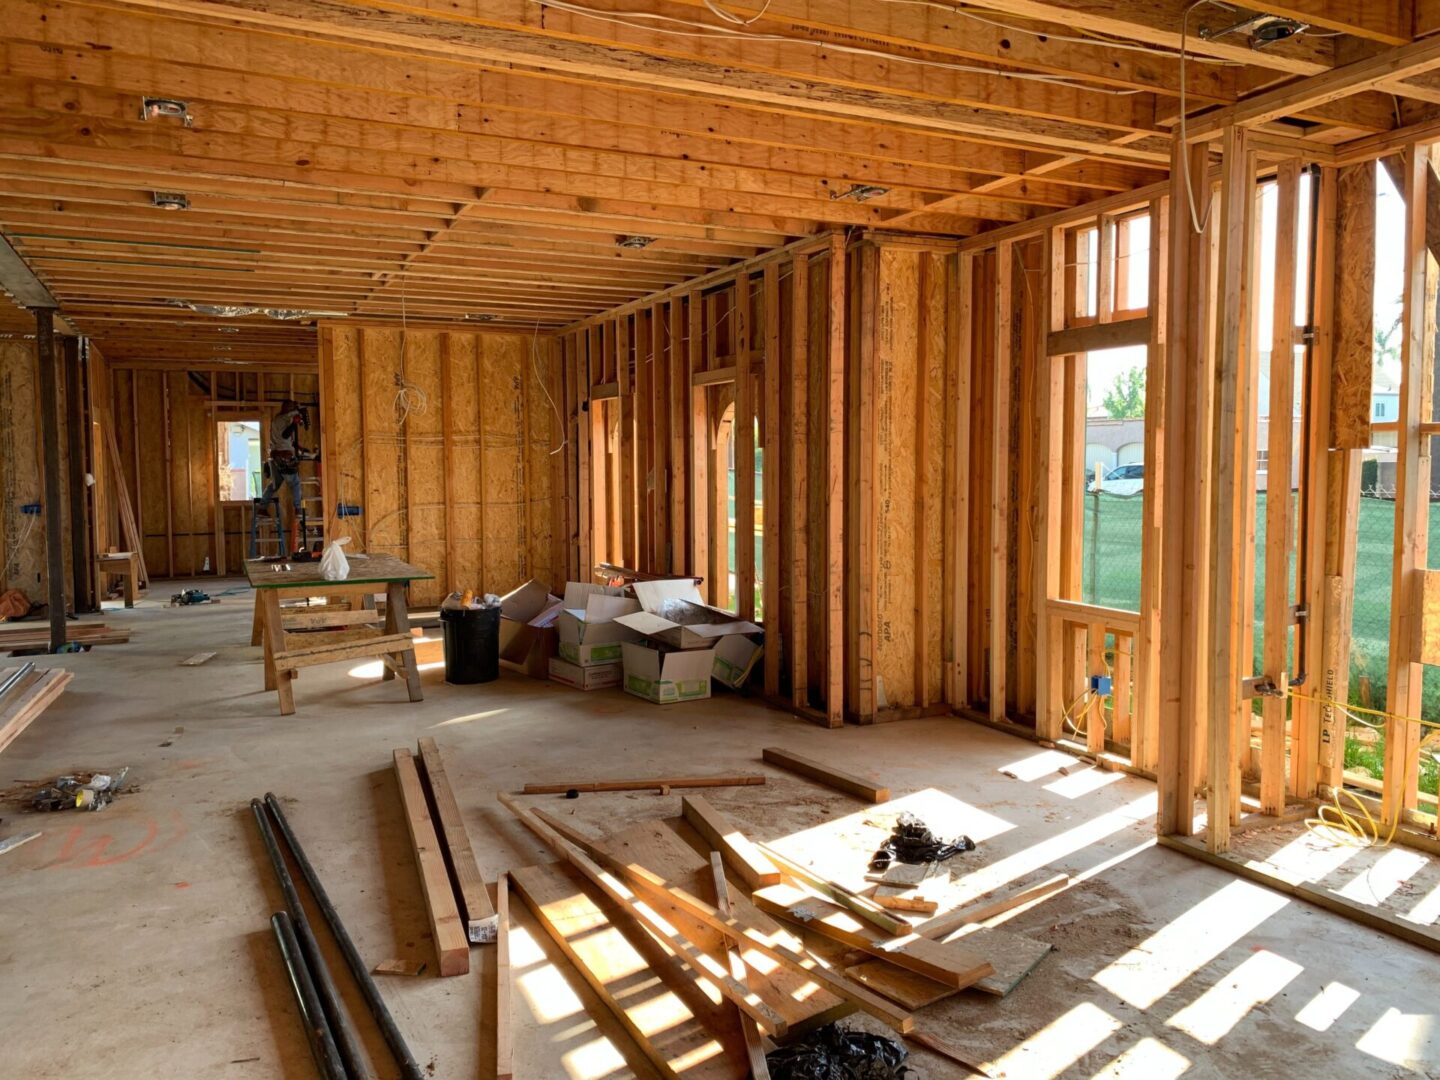 Interior framework of a house under construction with exposed wooden studs and scattered building materials.